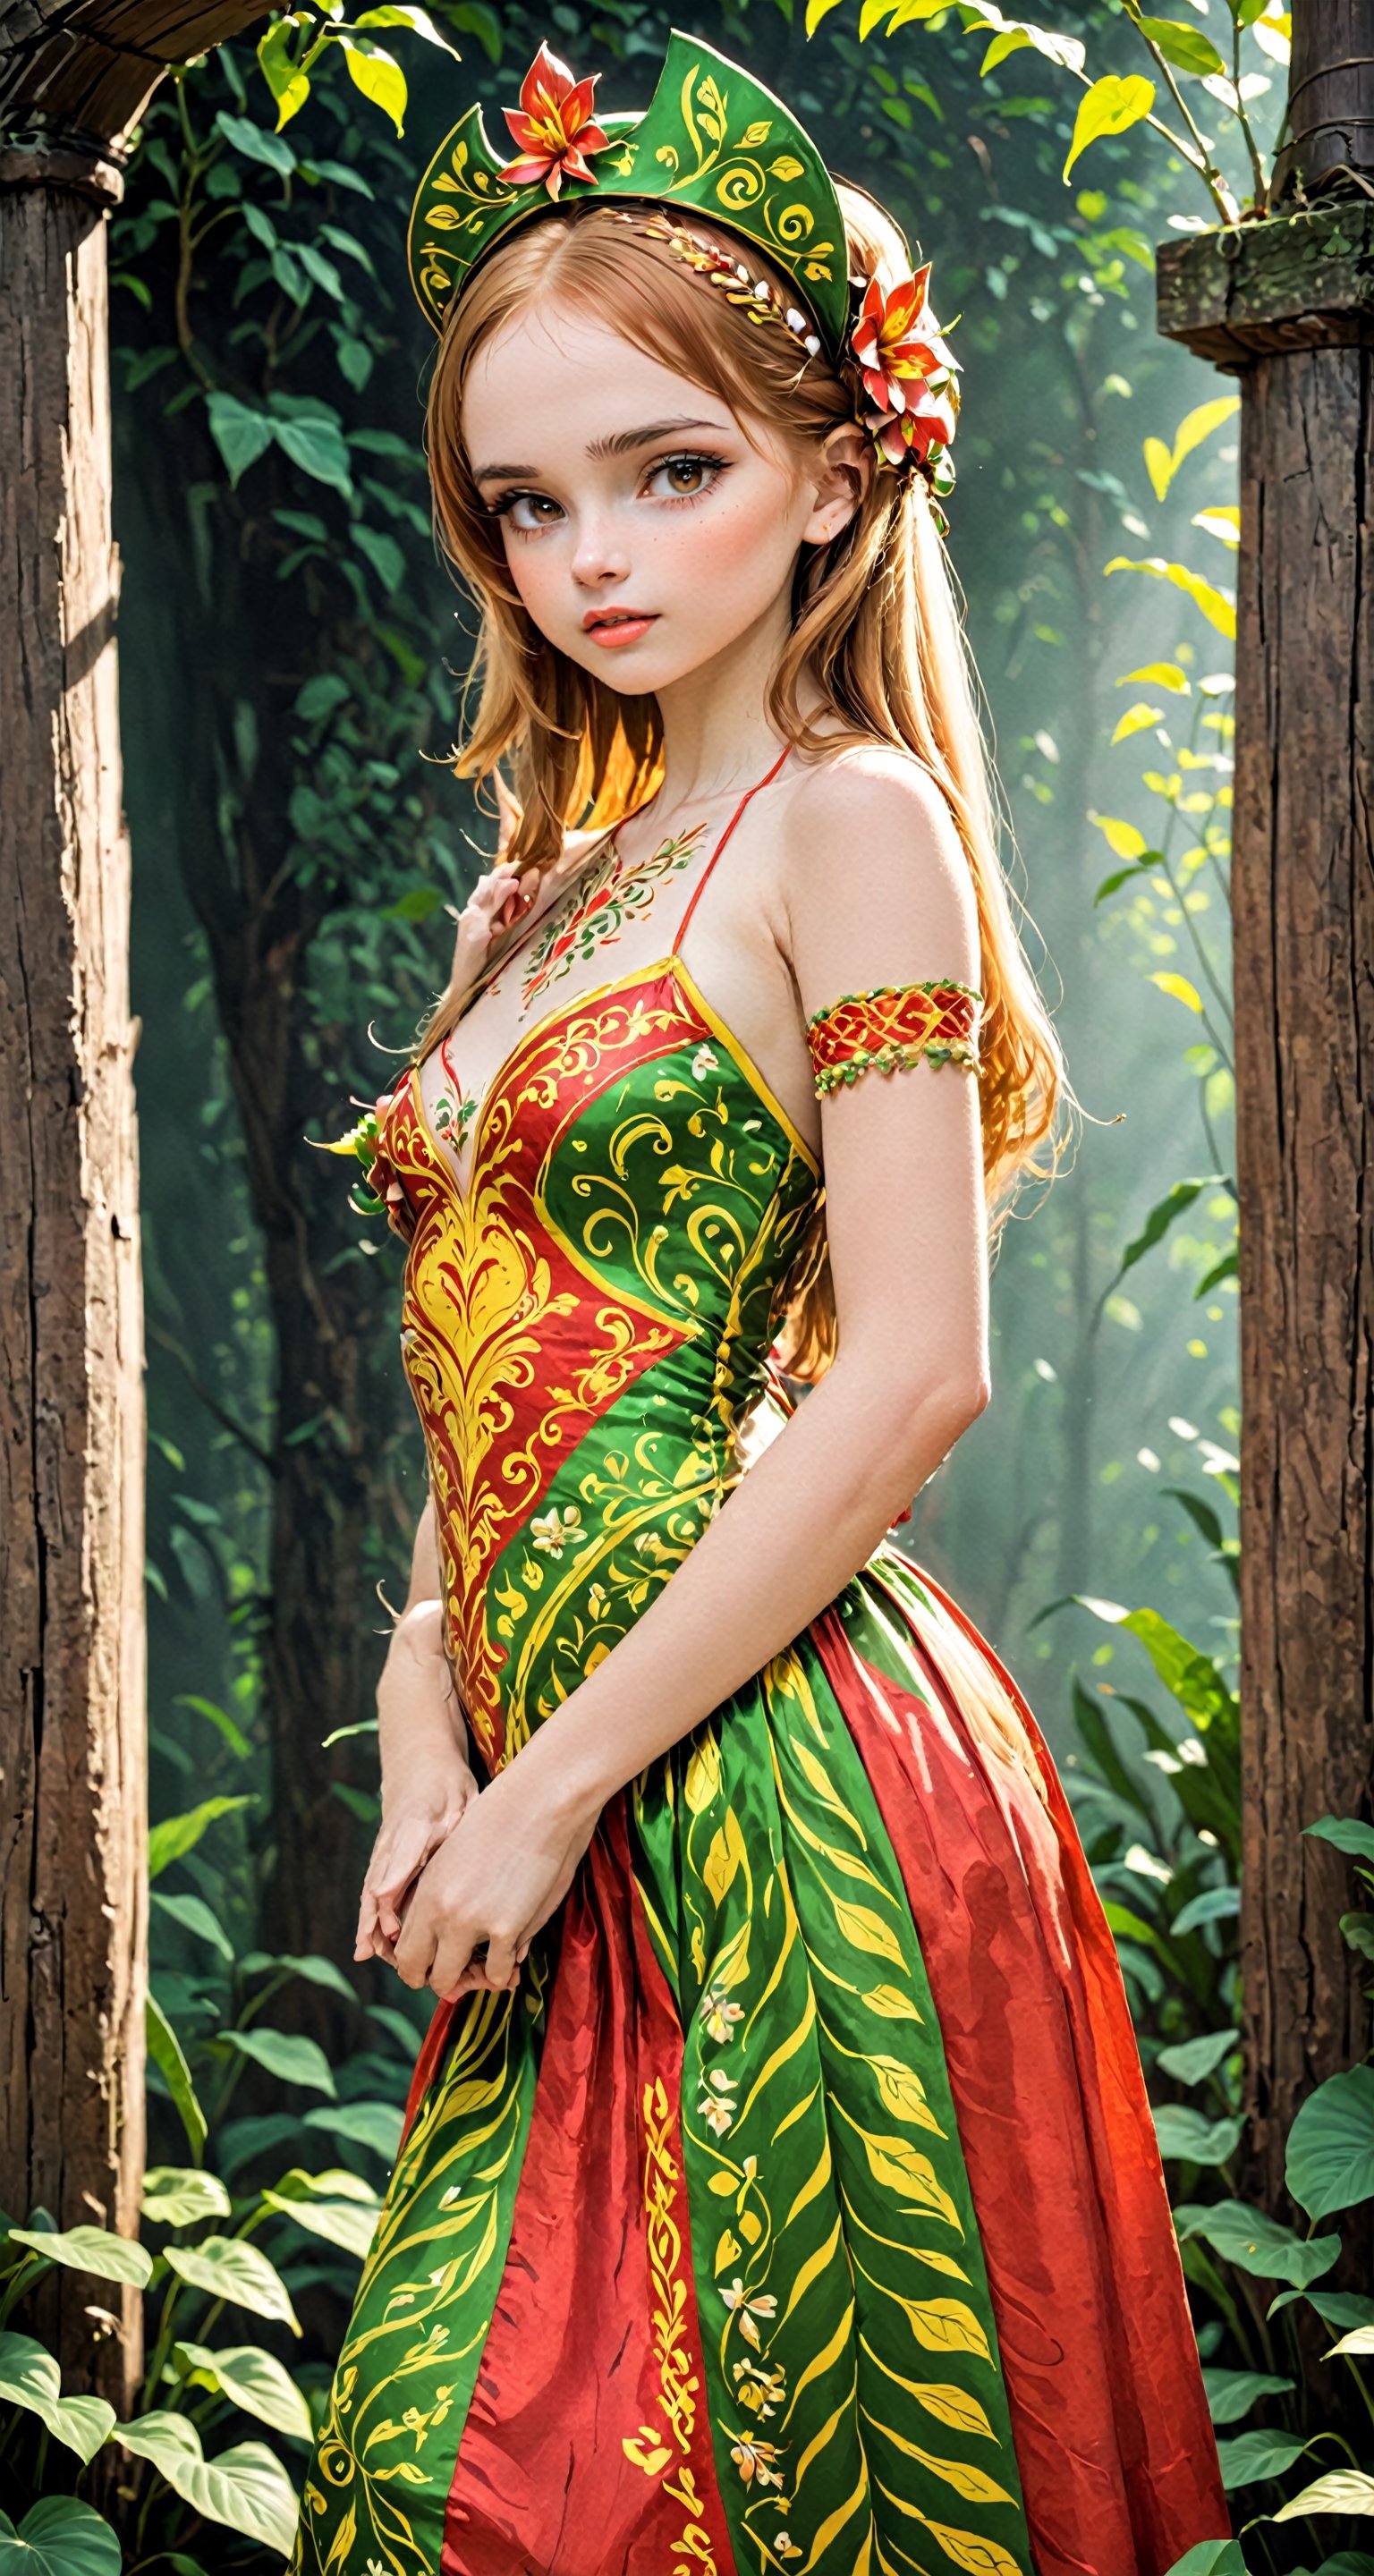  Slavic Young girl, wearing a seductive Vietnamese ethnic costume yem, blending the traditional attire of Vietnam with the allure of a Slavic beauty. The yem, with its form-fitting design and intricate detailing,,ao_yem